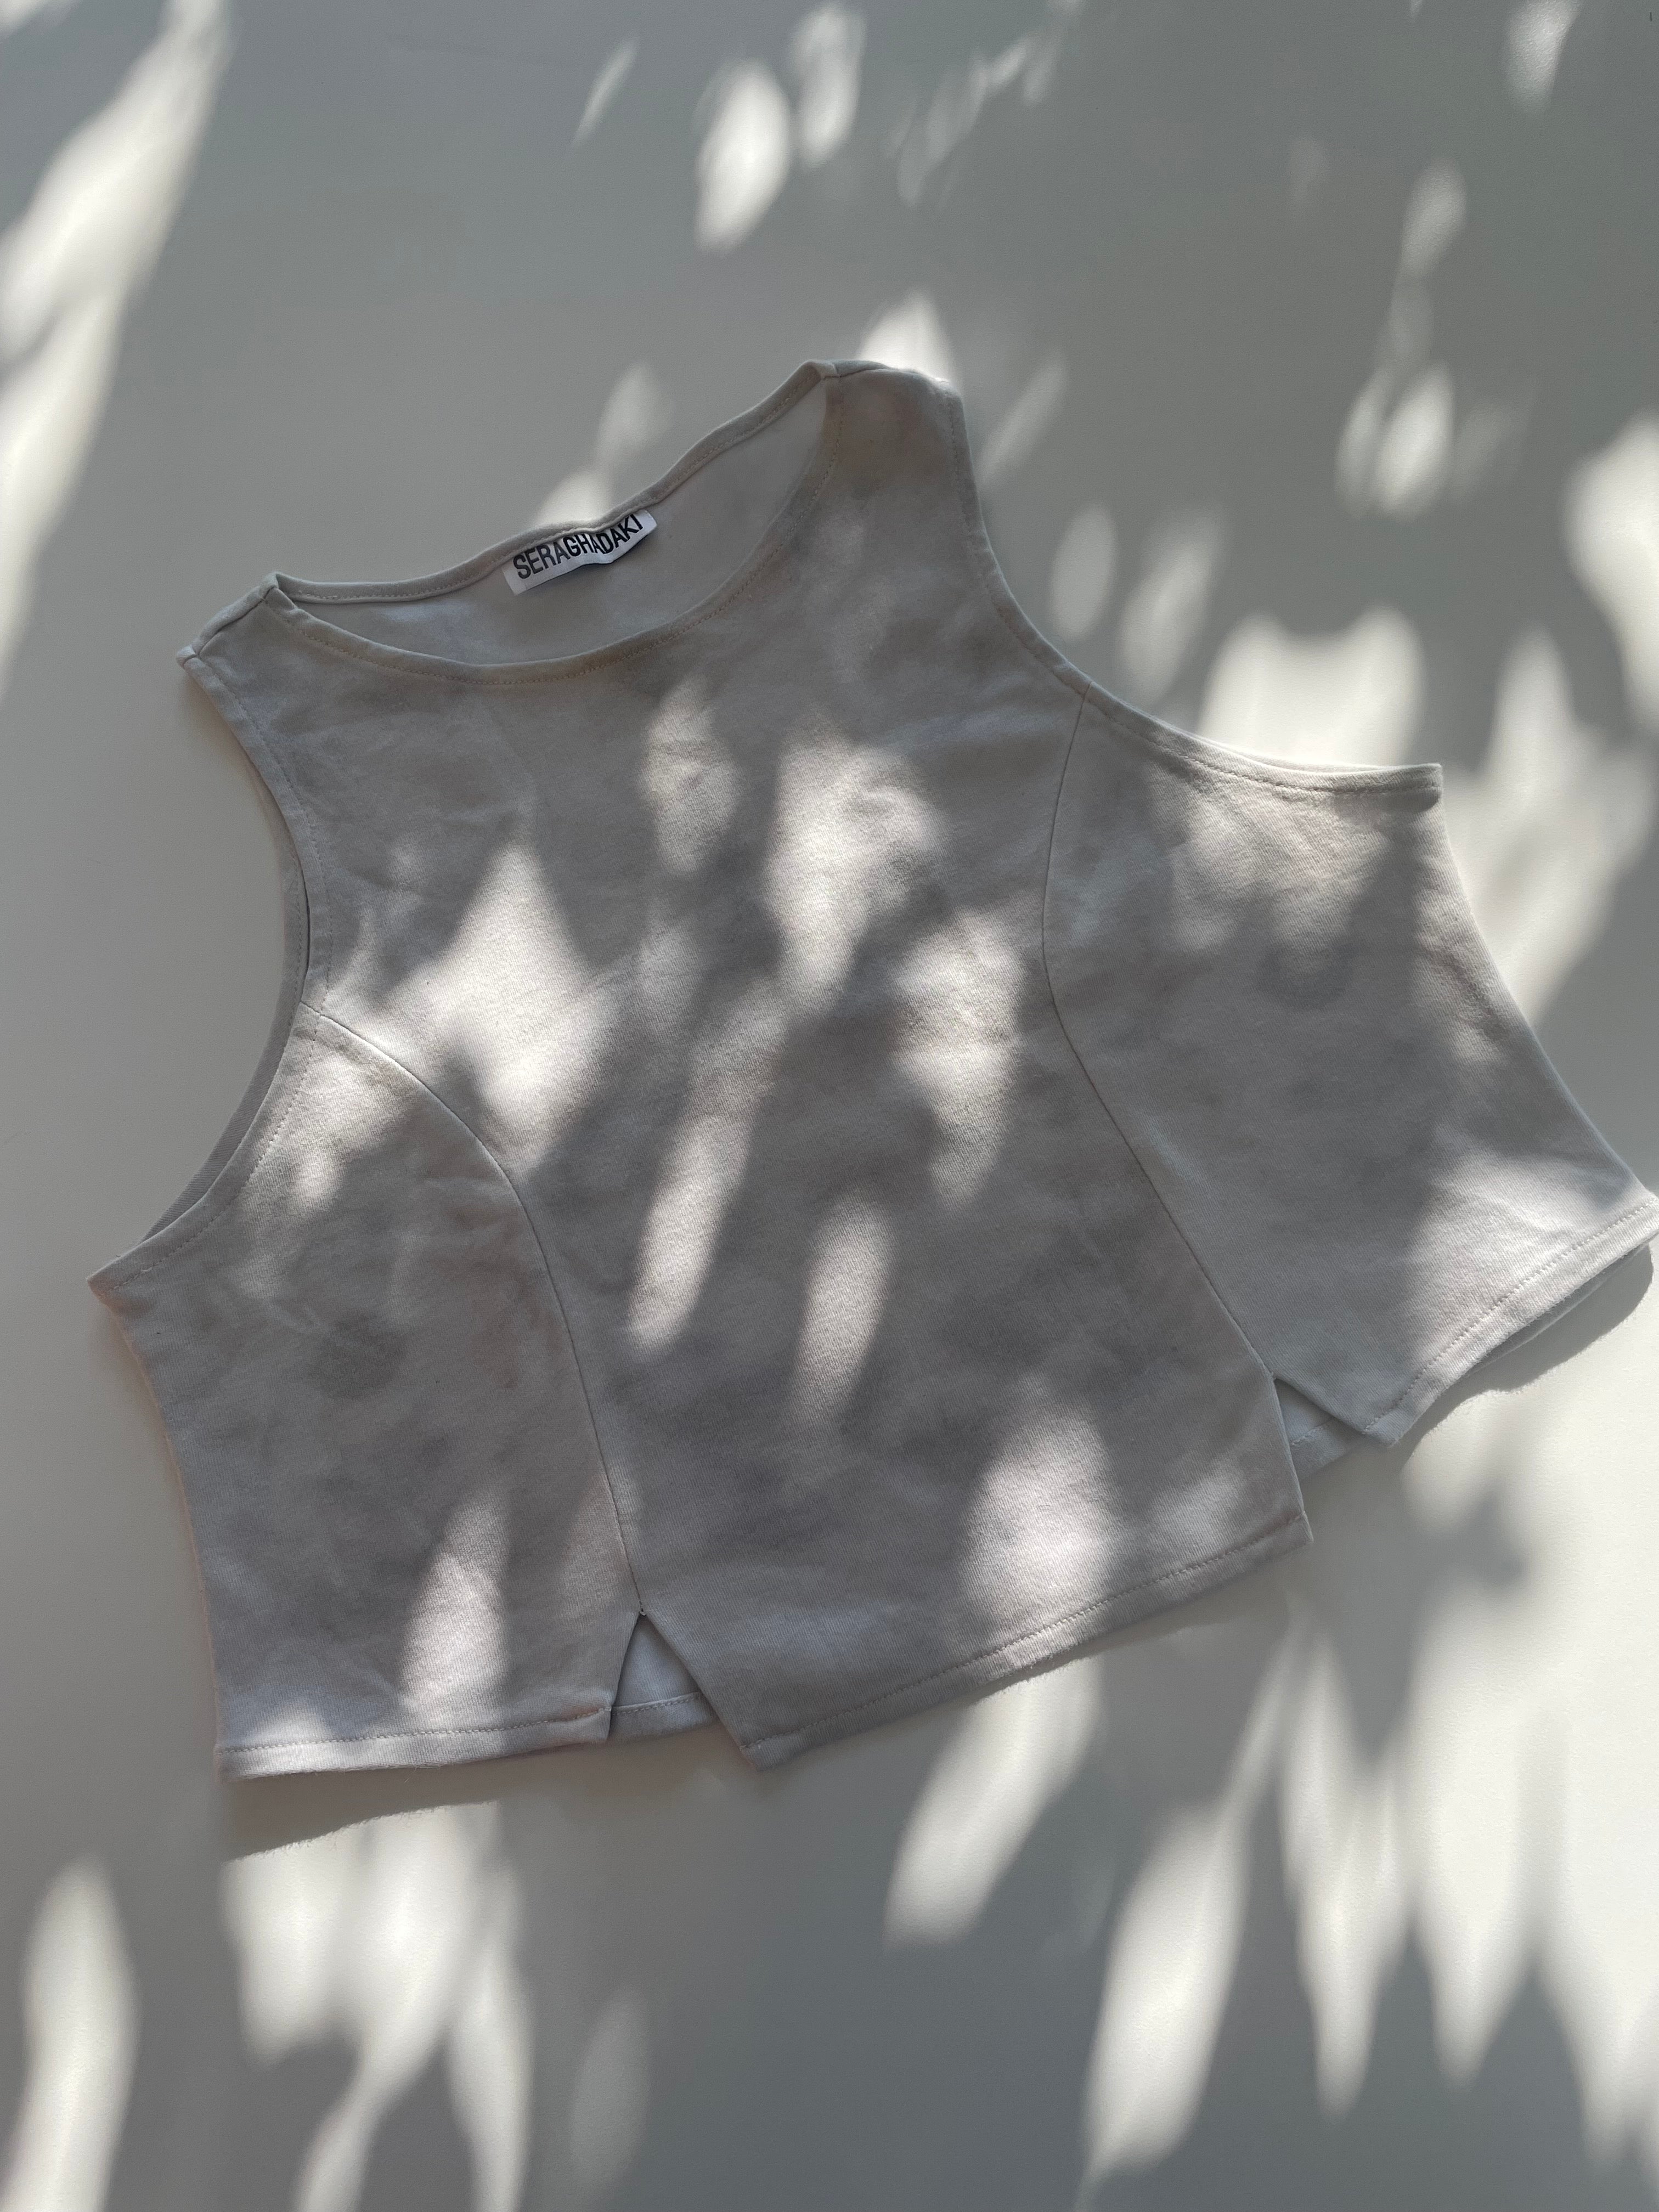 Umbra Top: cropped high neck tank top with cutouts in a custom shadow print. Made to order in NYC.